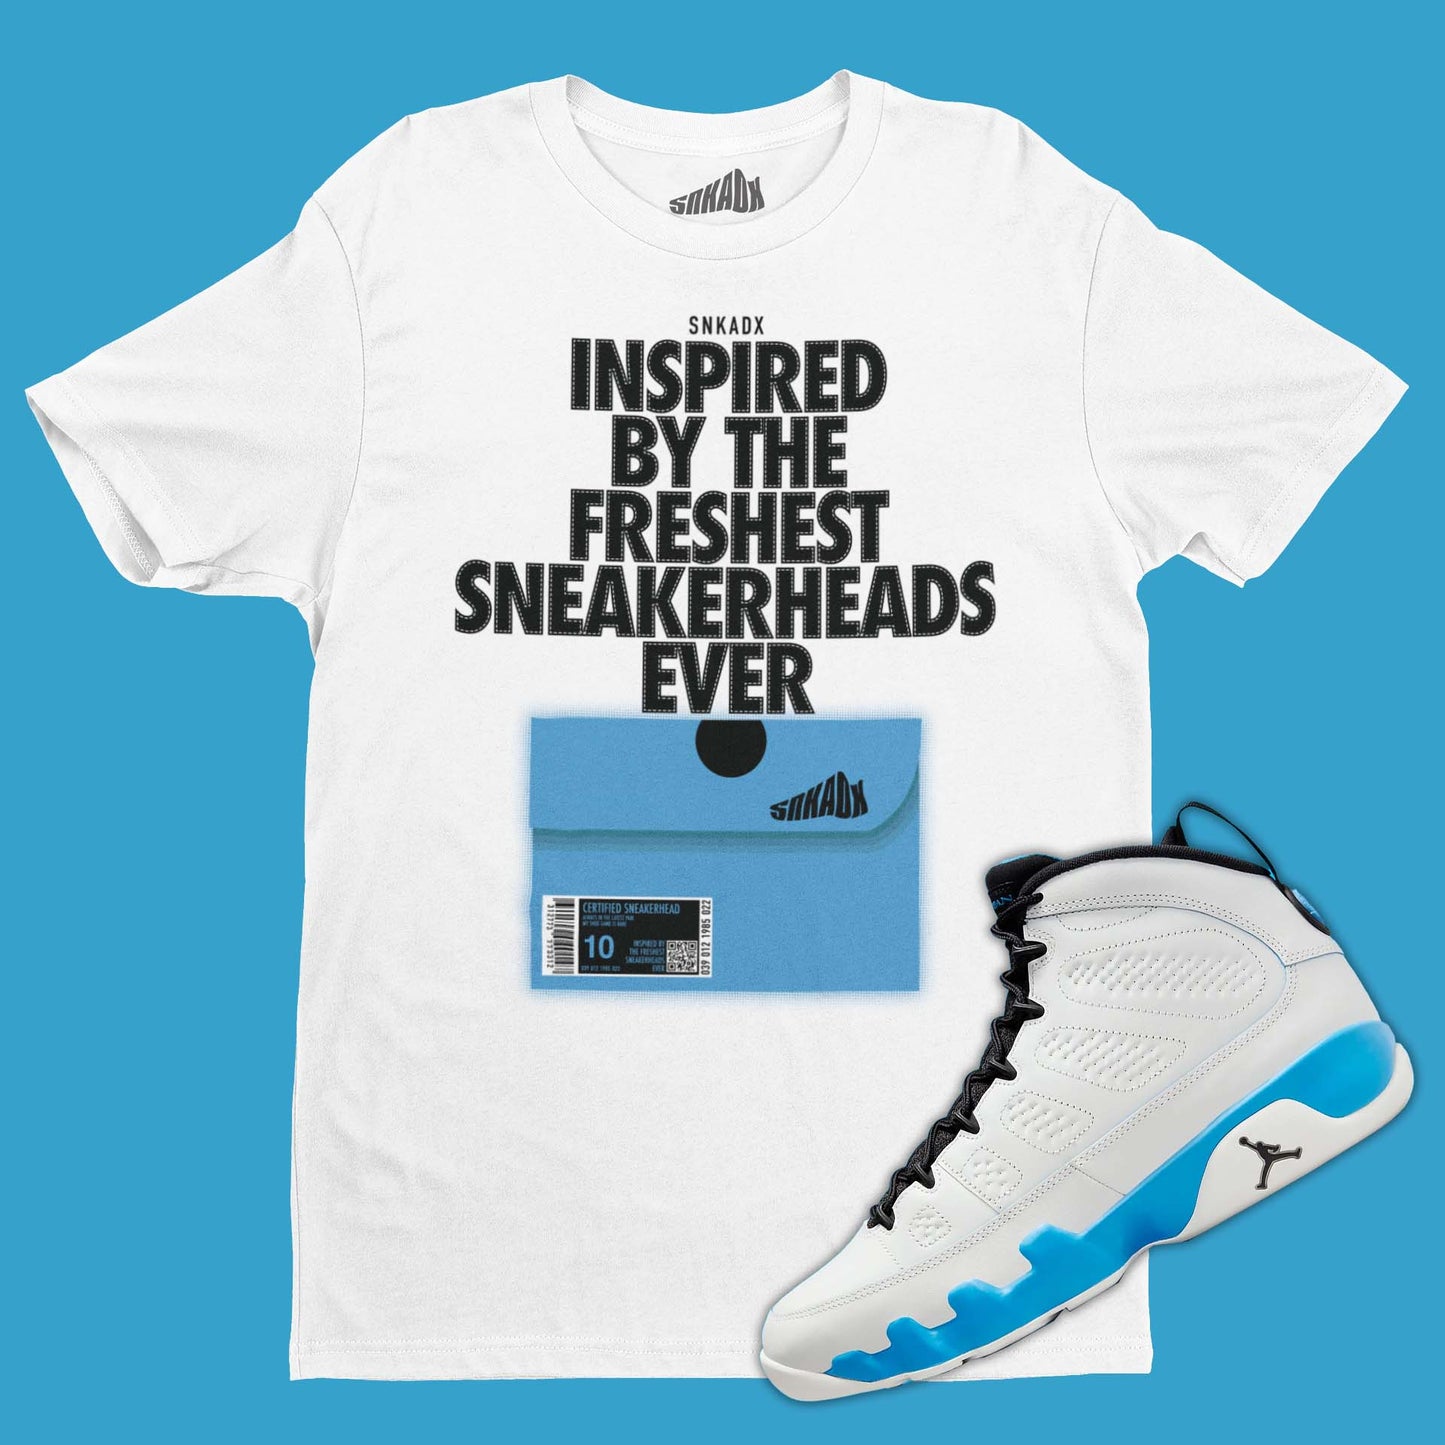 Shoe Box White T-Shirt Matching Air At a Jordan Brand event for All-Star weekend an attendee was spotted in this